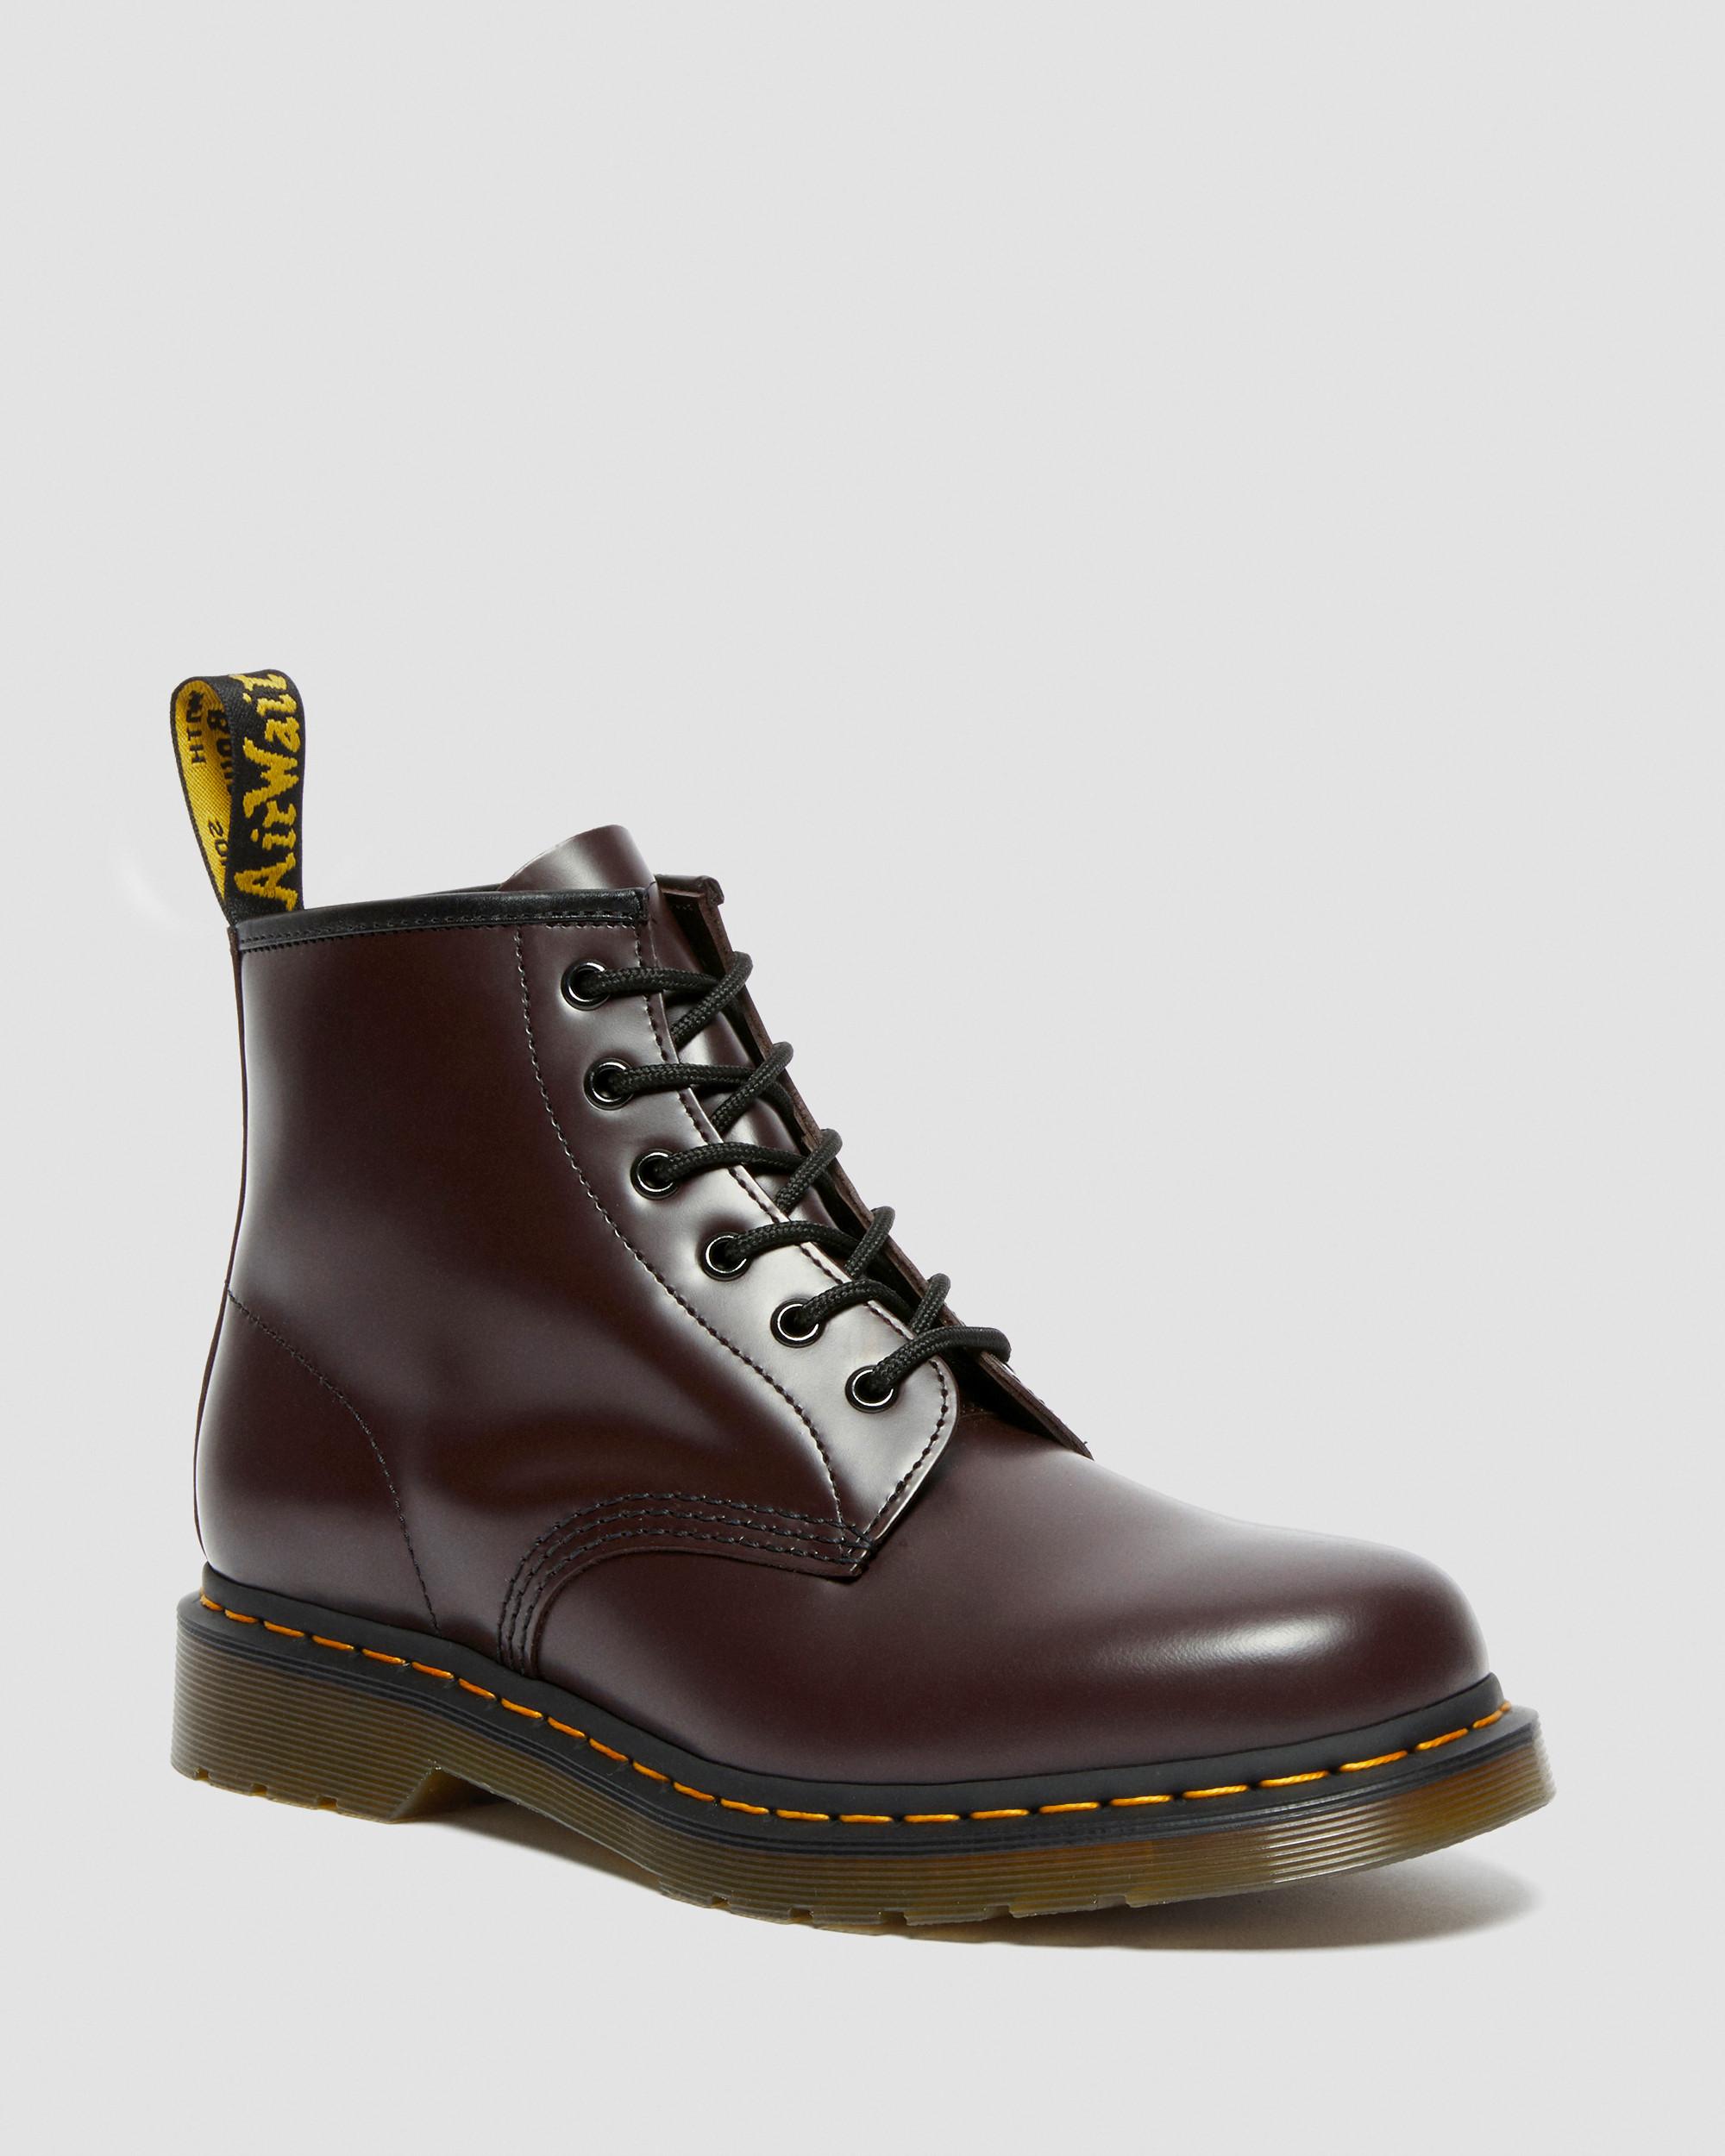 BOTAS DR MARTENS MUJER Y HOMBRE - ONLINESHOPPINGCENTERG